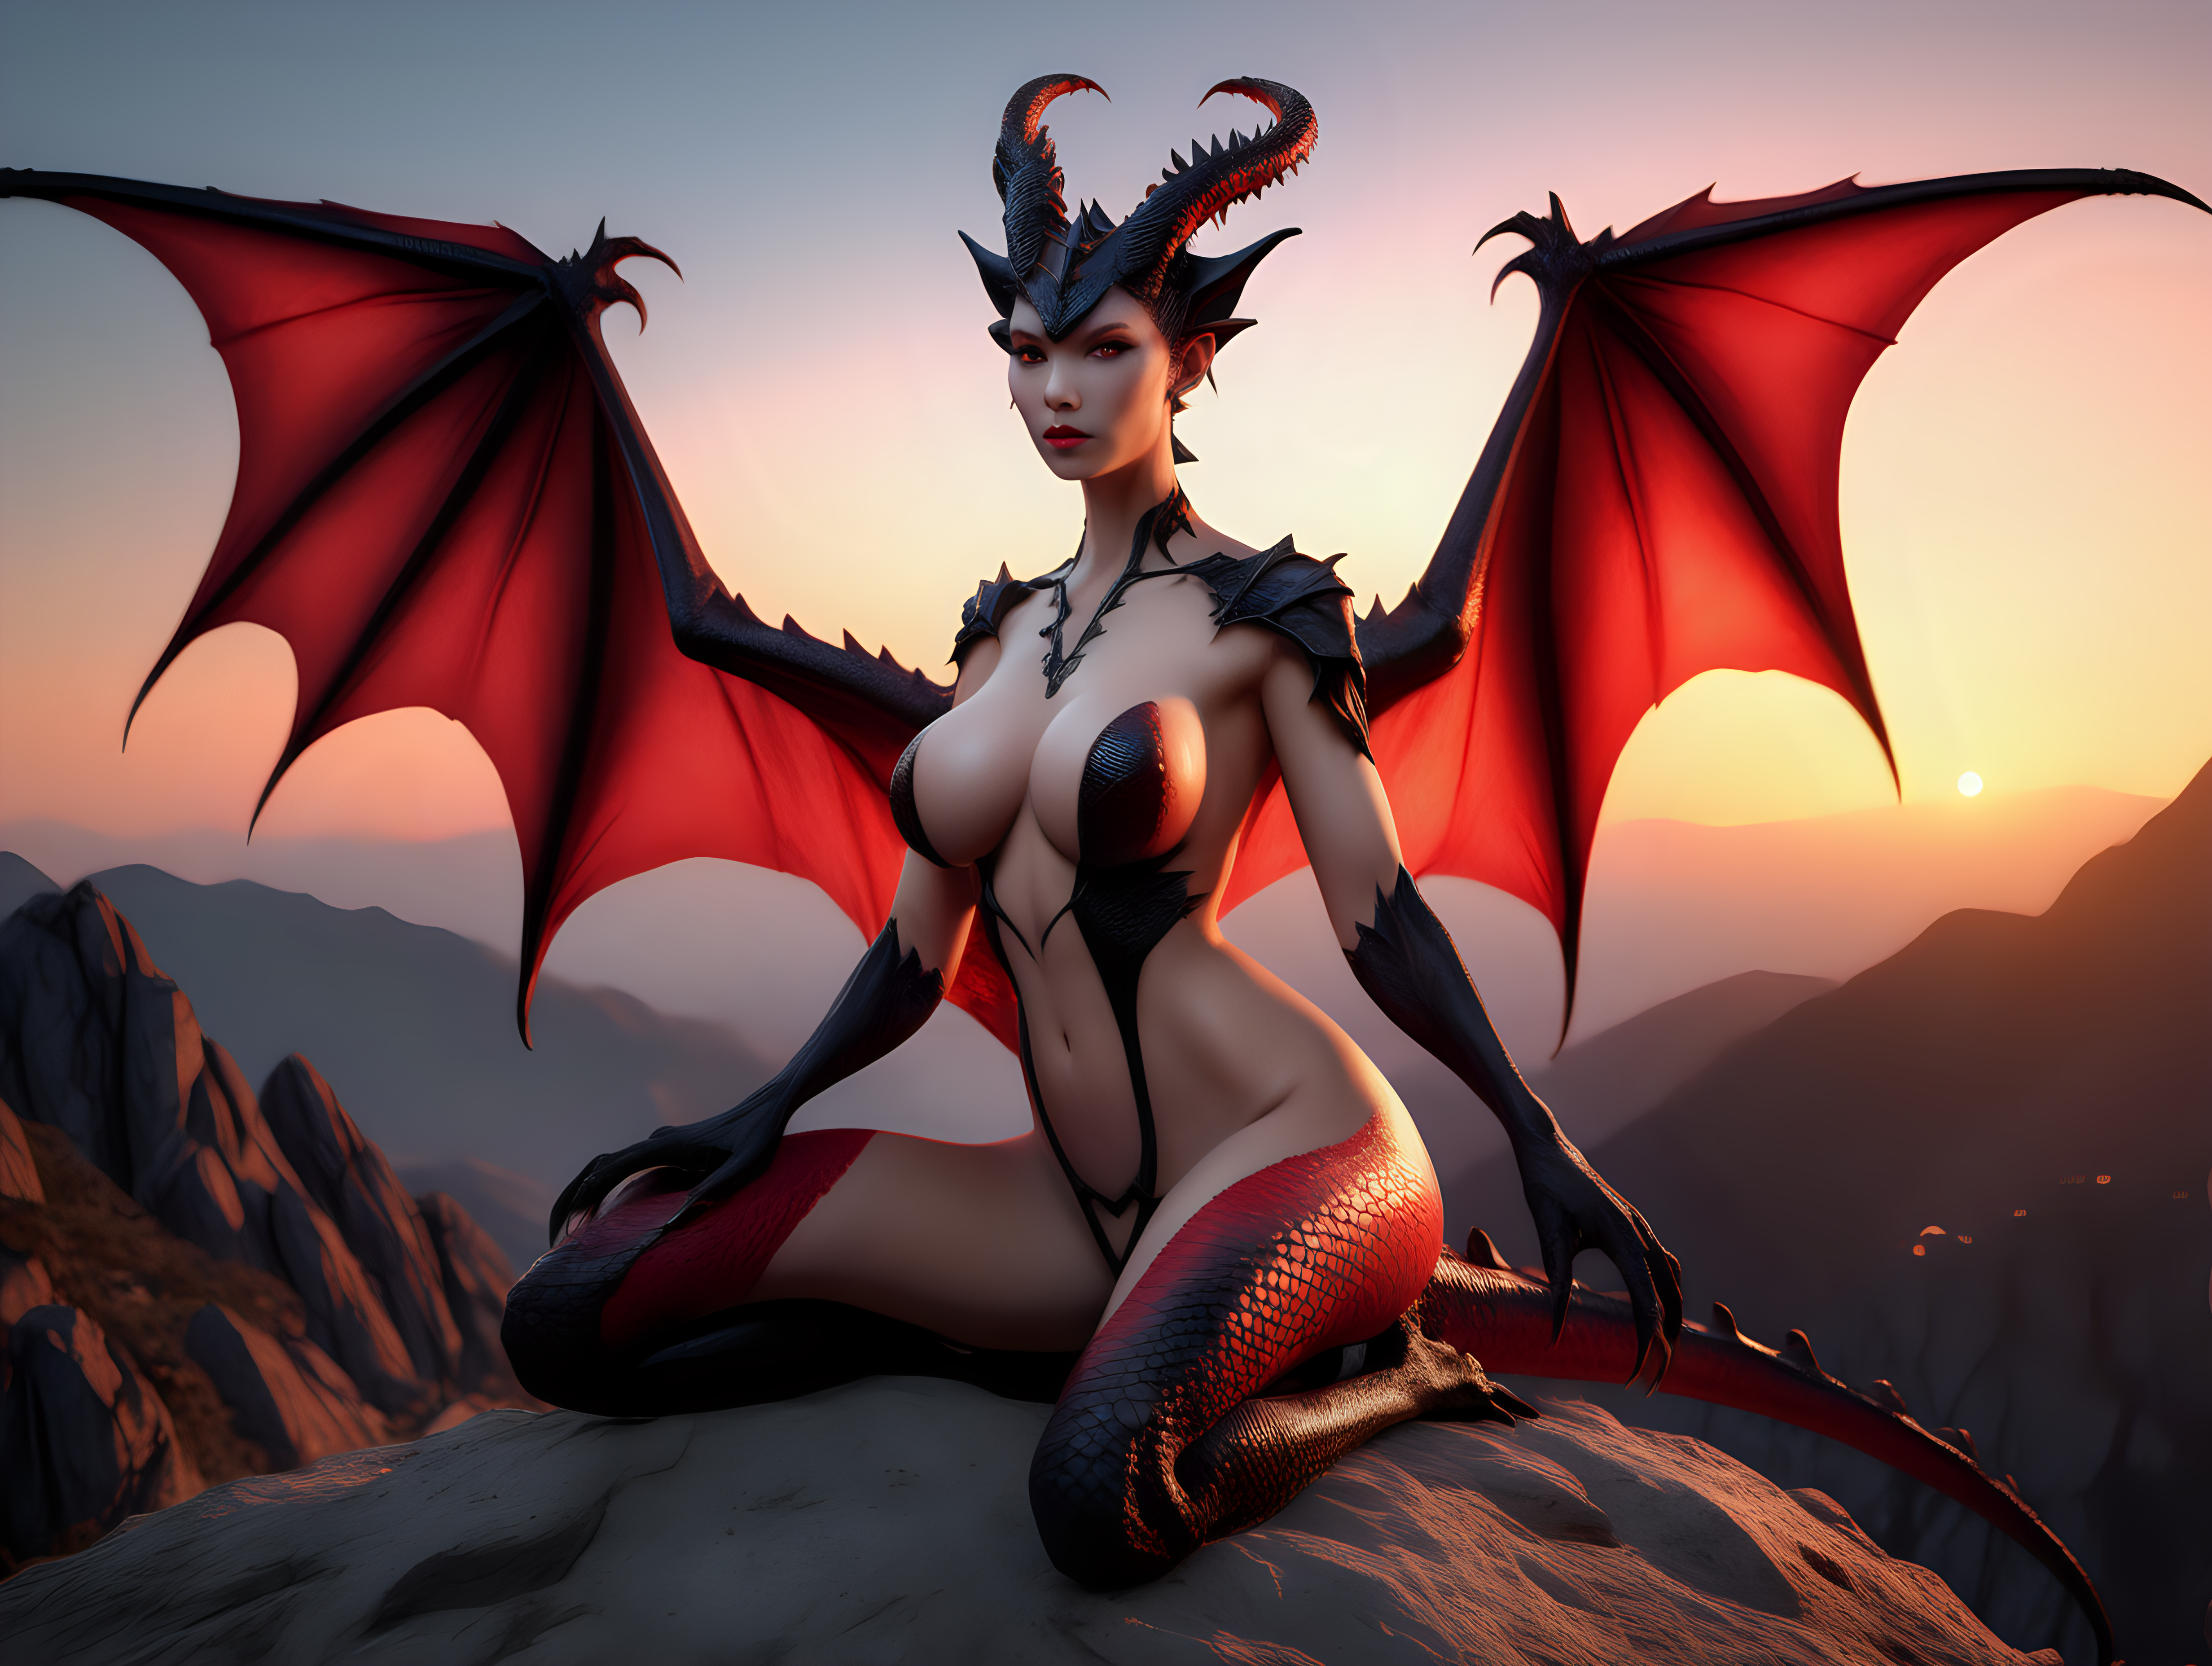 ultra-realistic high resolution and highly detailed adult film photoshoot of a slender female human dragon, with sleek pointy black horns gently swept straight backwards over head, with massive firm breasts, red scales growing on her body, she has draconic symbols on her arms and body, sitting on a mountain top in the sunset protecting her clutch of eggs facing the camera